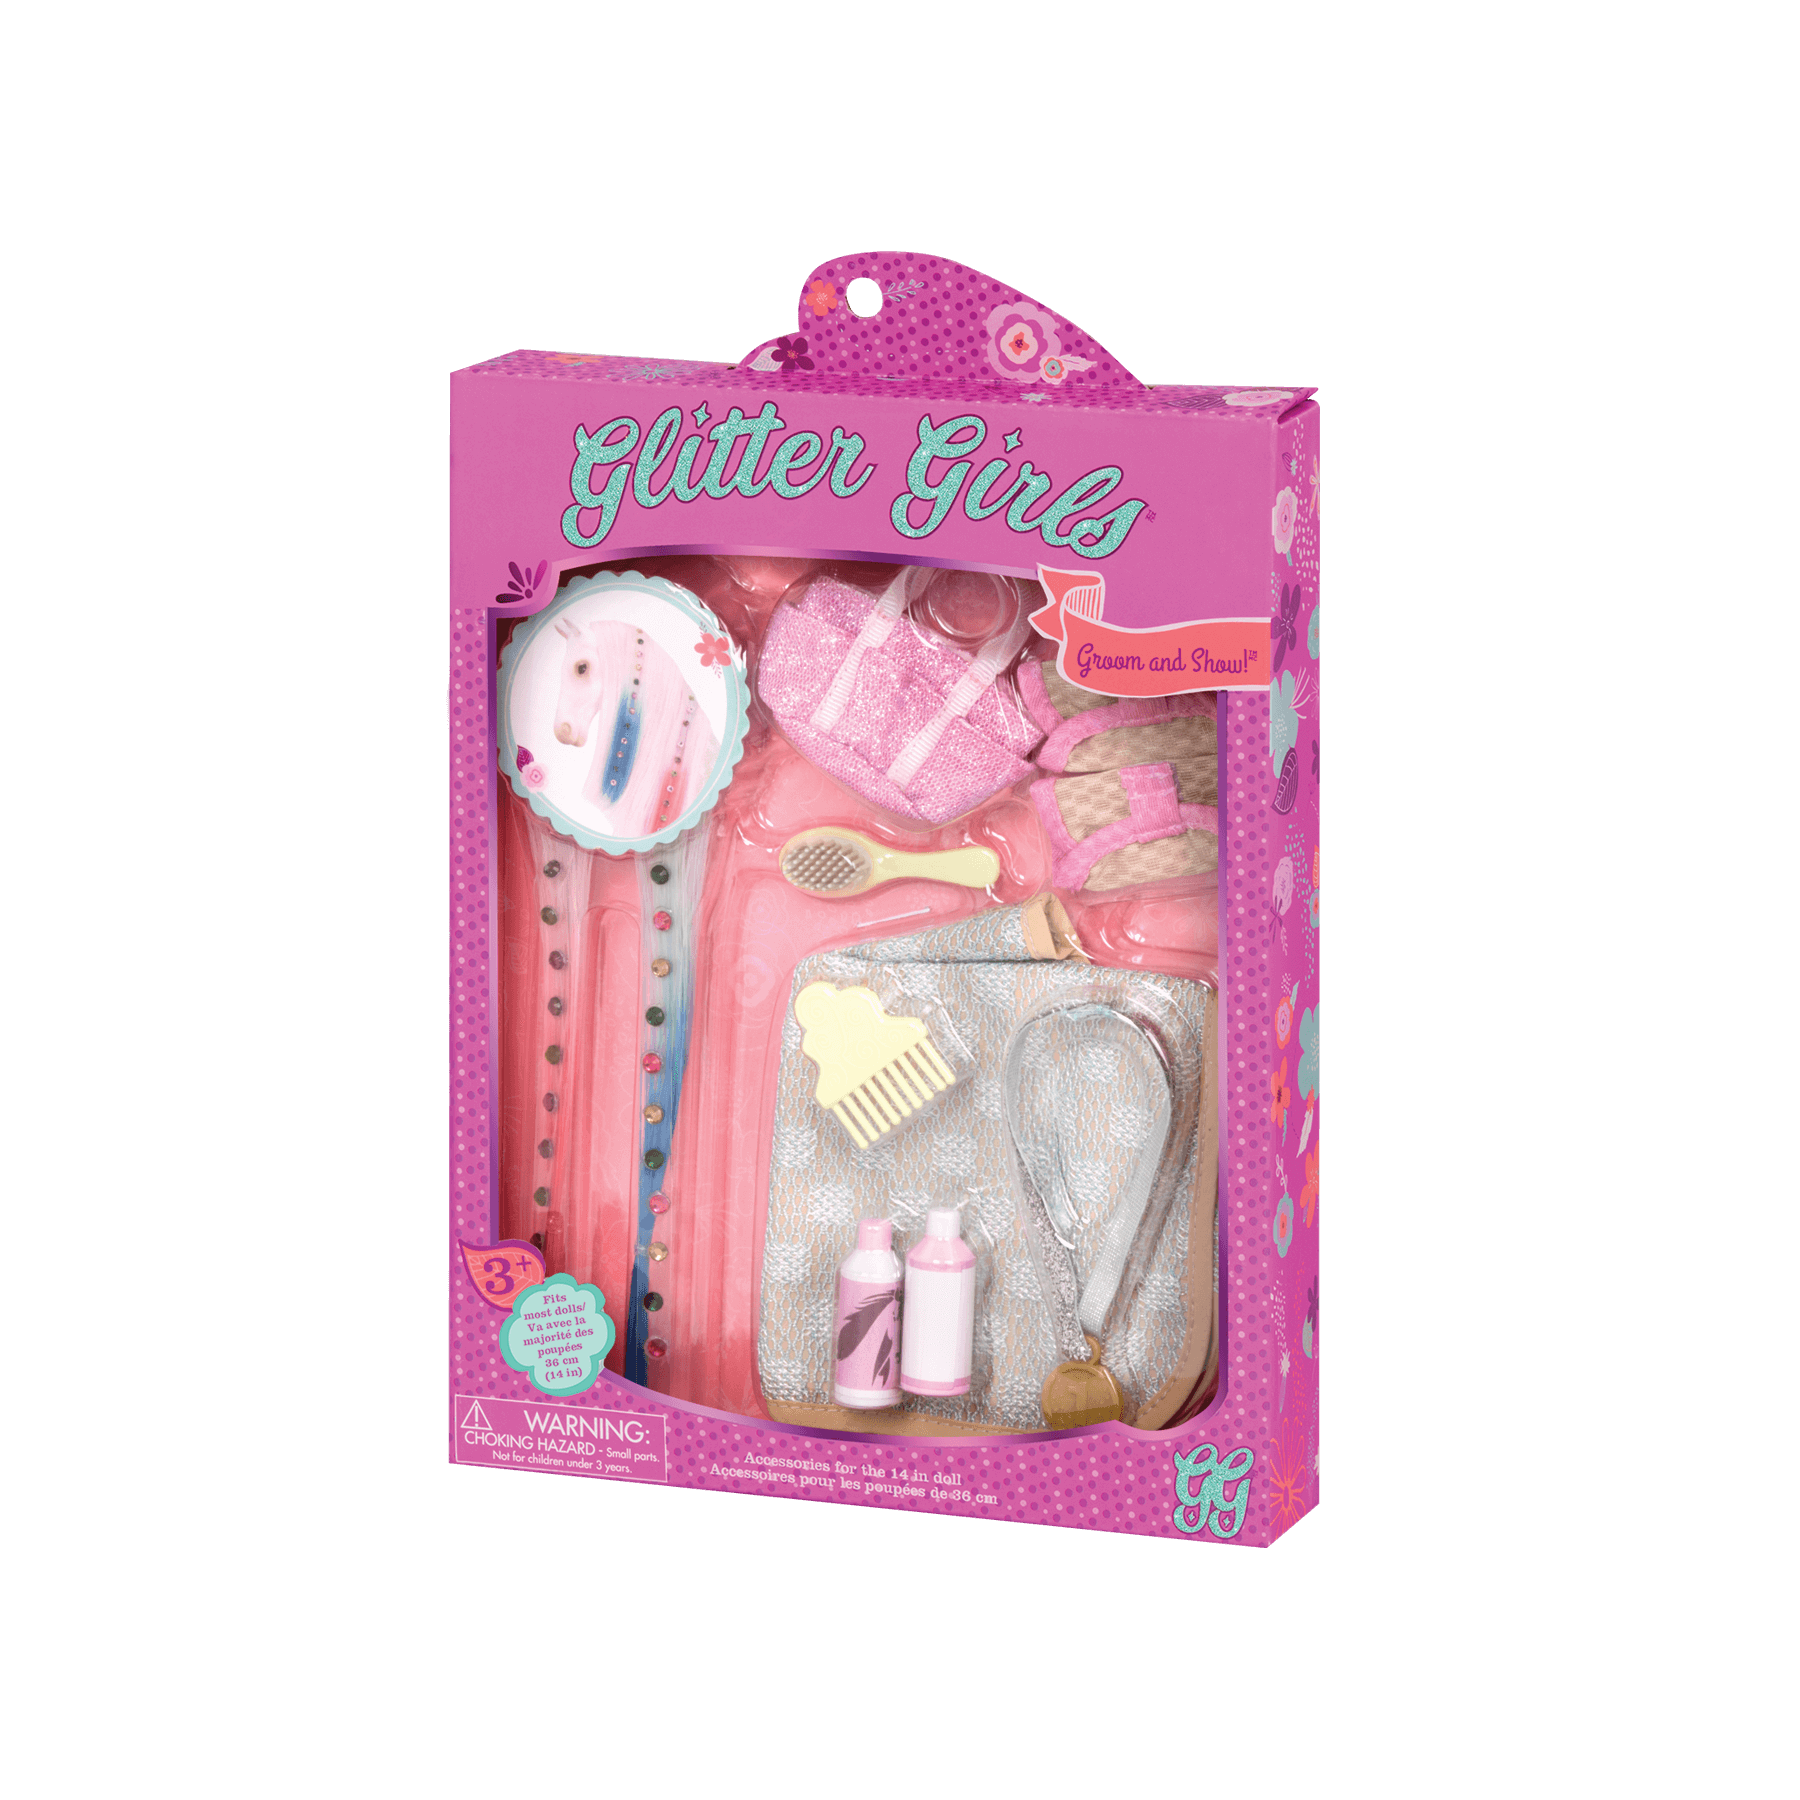 and Show|Toy Horse Accessory Set|Glitter Girls